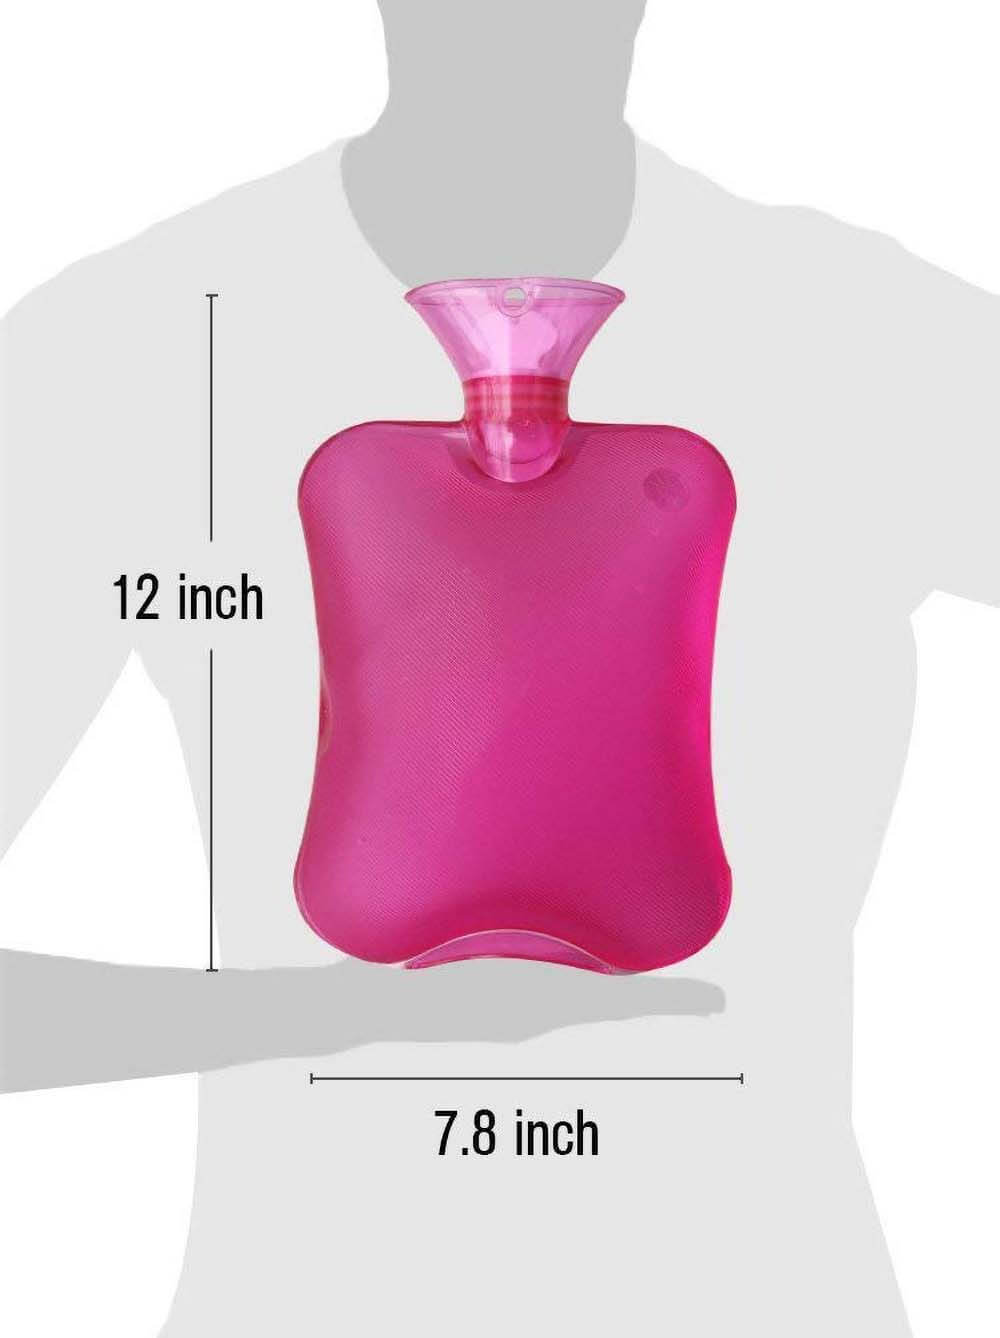 Worldgrowing Hot Water Bottle with Cover Knitted for aches and pains | Transparent Hot Water Bag